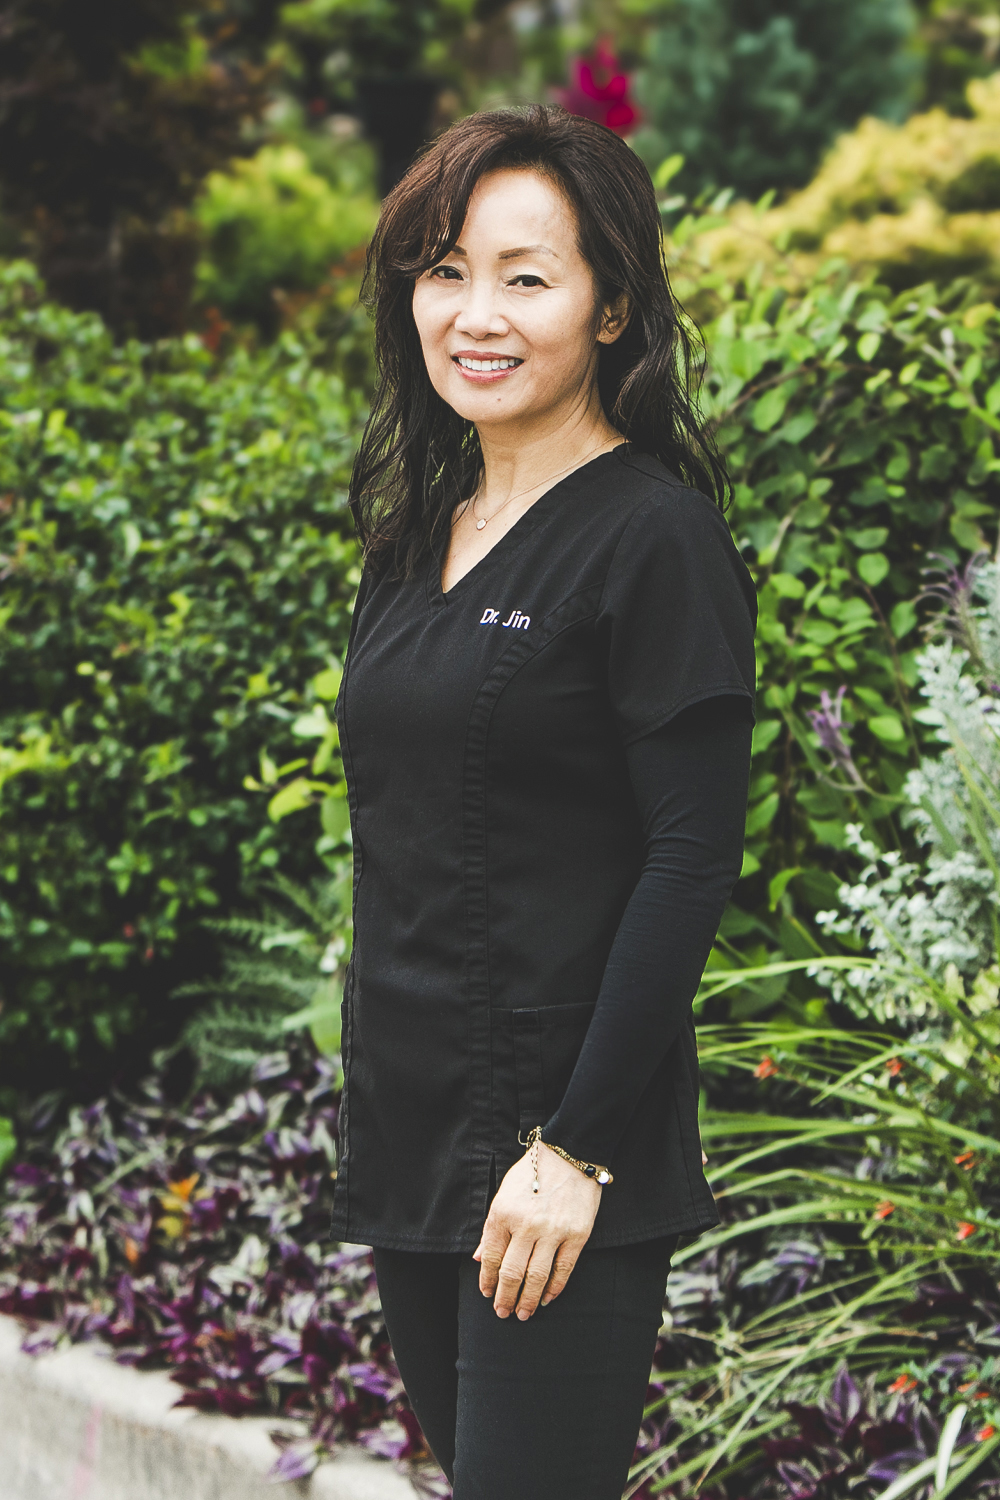 A woman with long, wavy, black and brown hair and wearing a dark-grey medical outfit with the label Dr. Jin embroidered to the pocket is standing in front of a lush city garden on a bright summer day